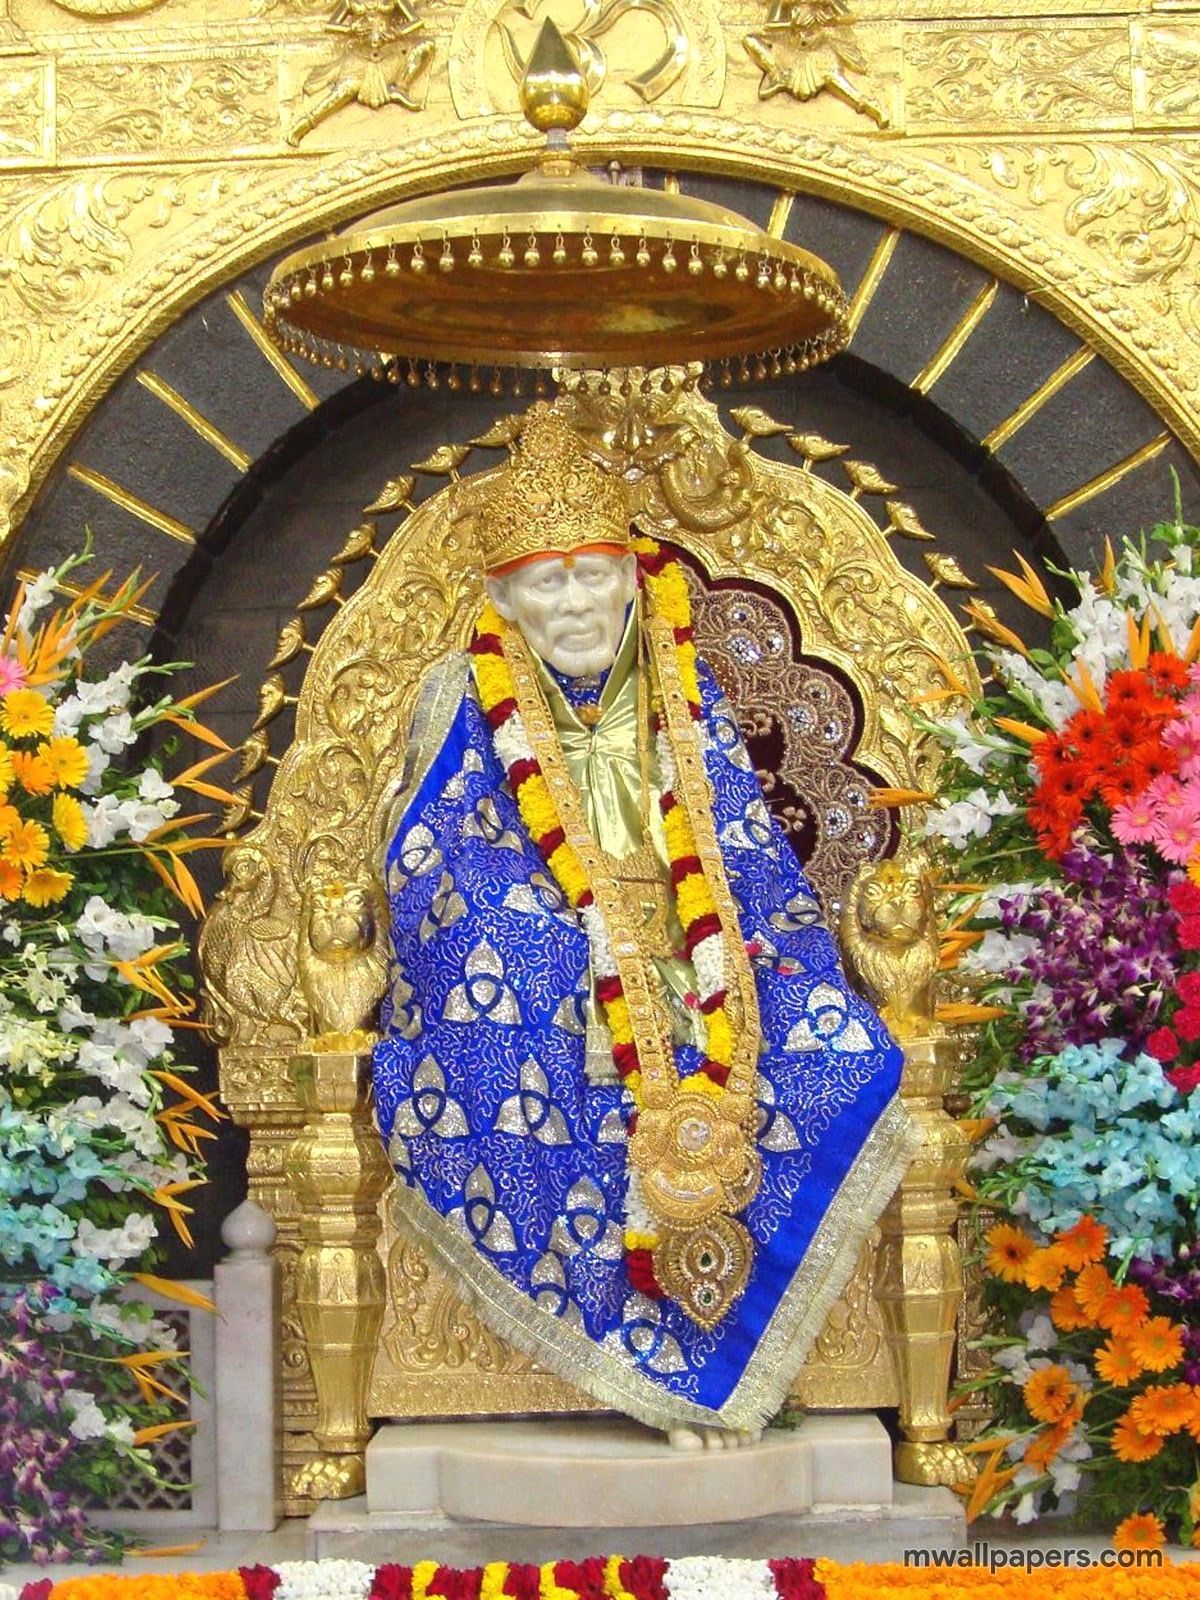 Download Sai Baba HD Photo in 1080p HD quality to use as your